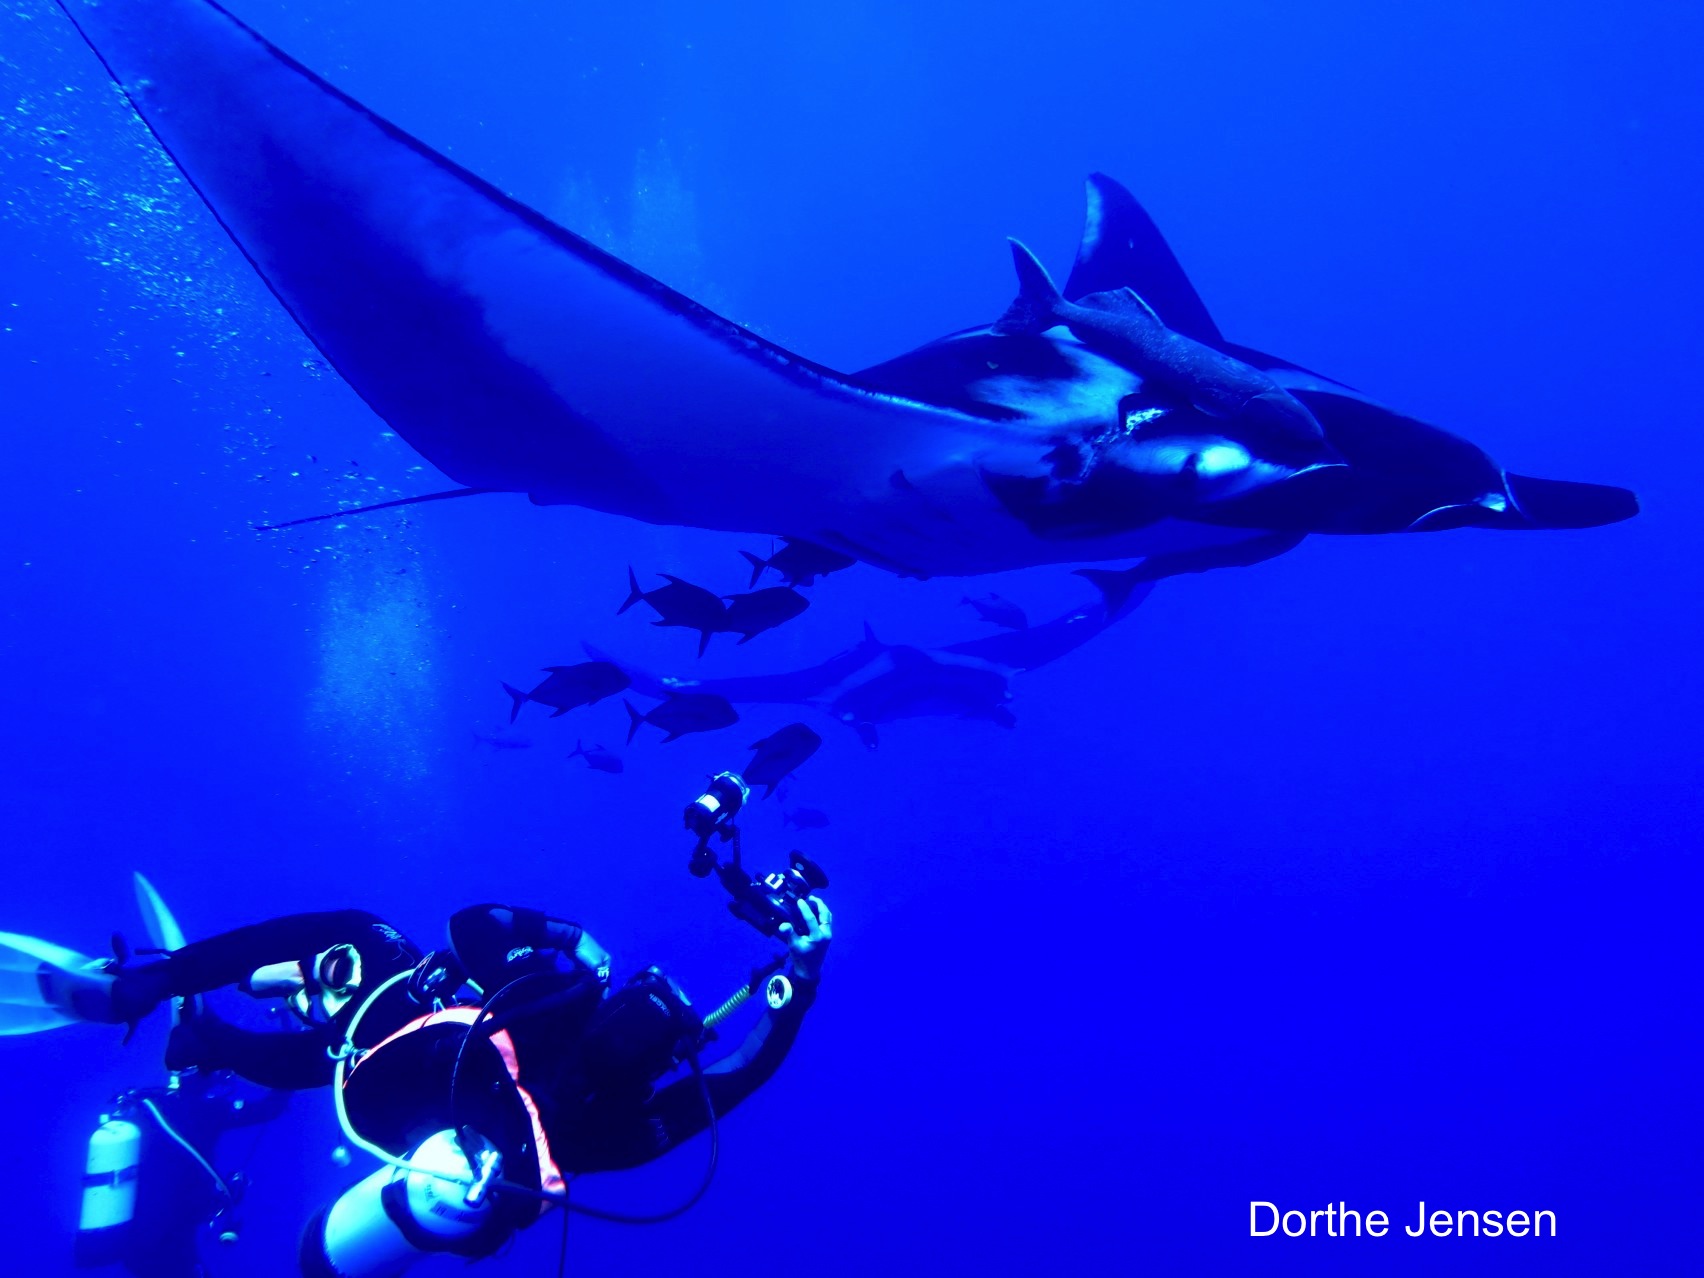 We got to see several mantas and they were interactive.